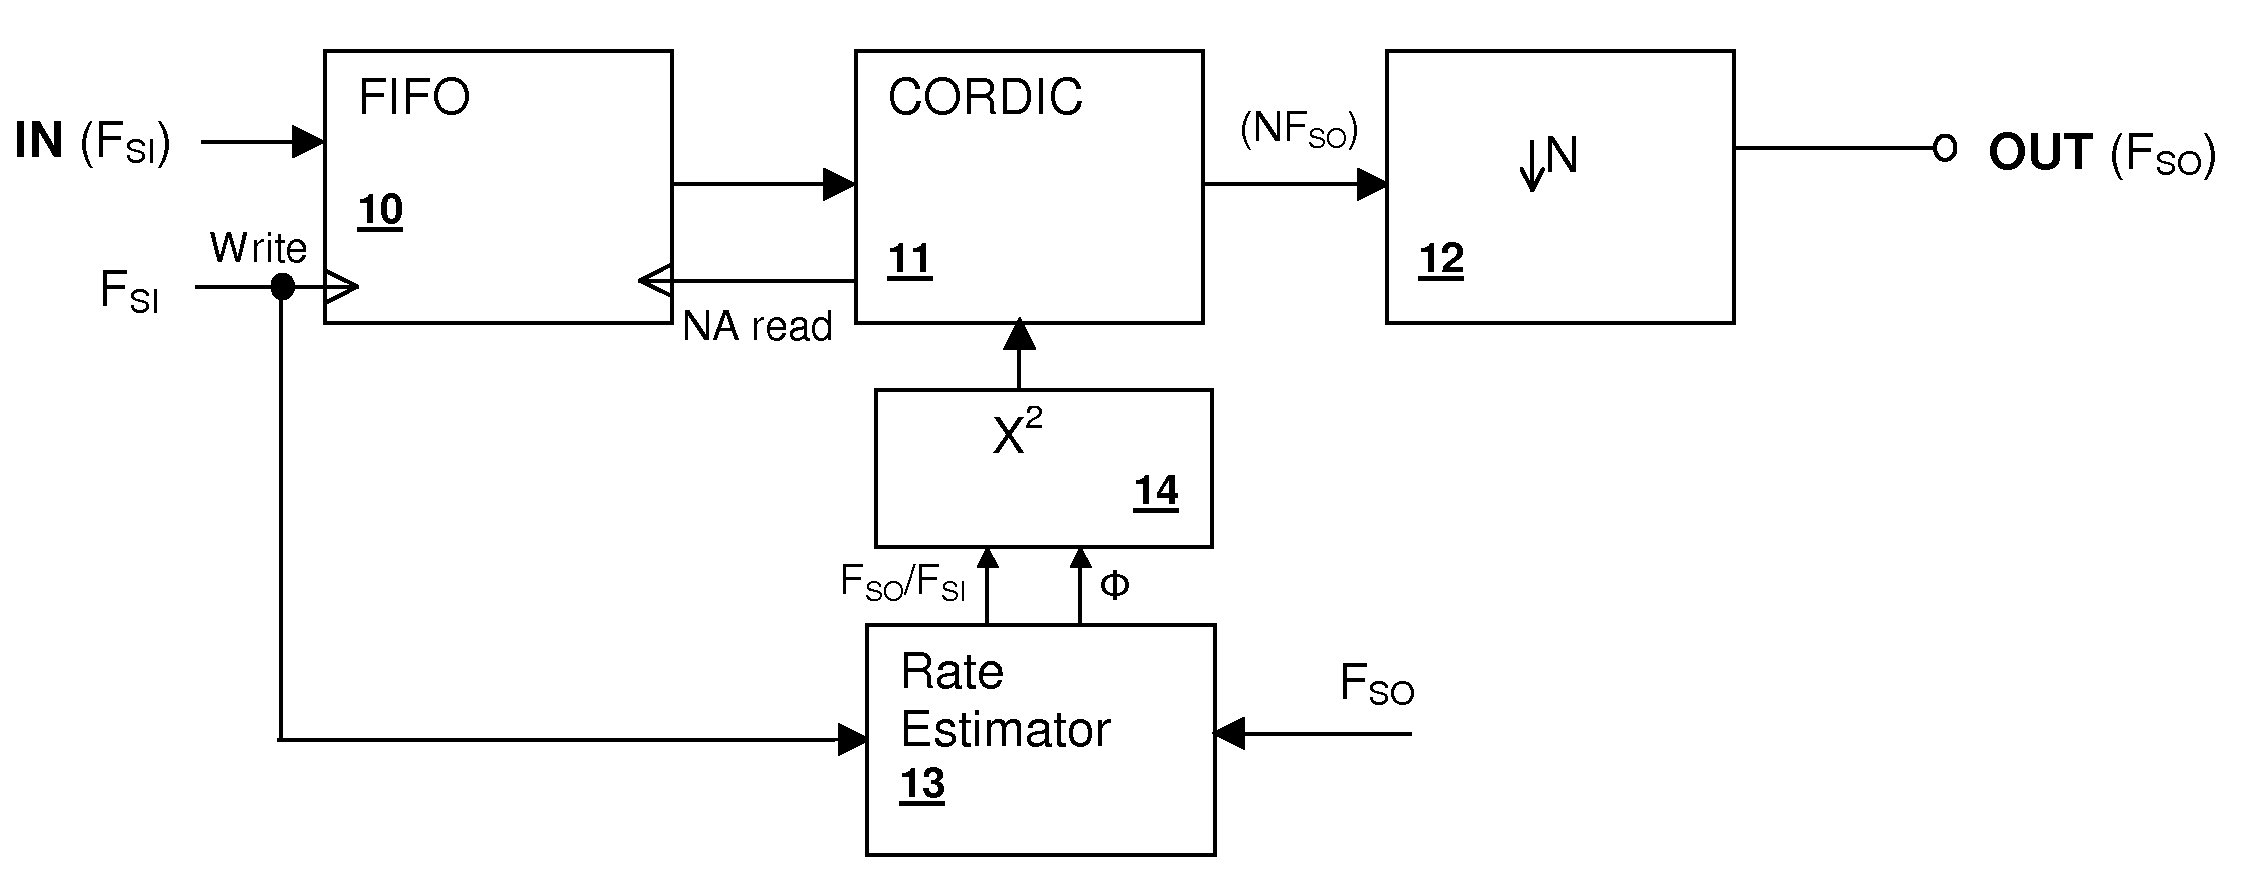 Real-time sample rate converter having a non-polynomial convolution kernel